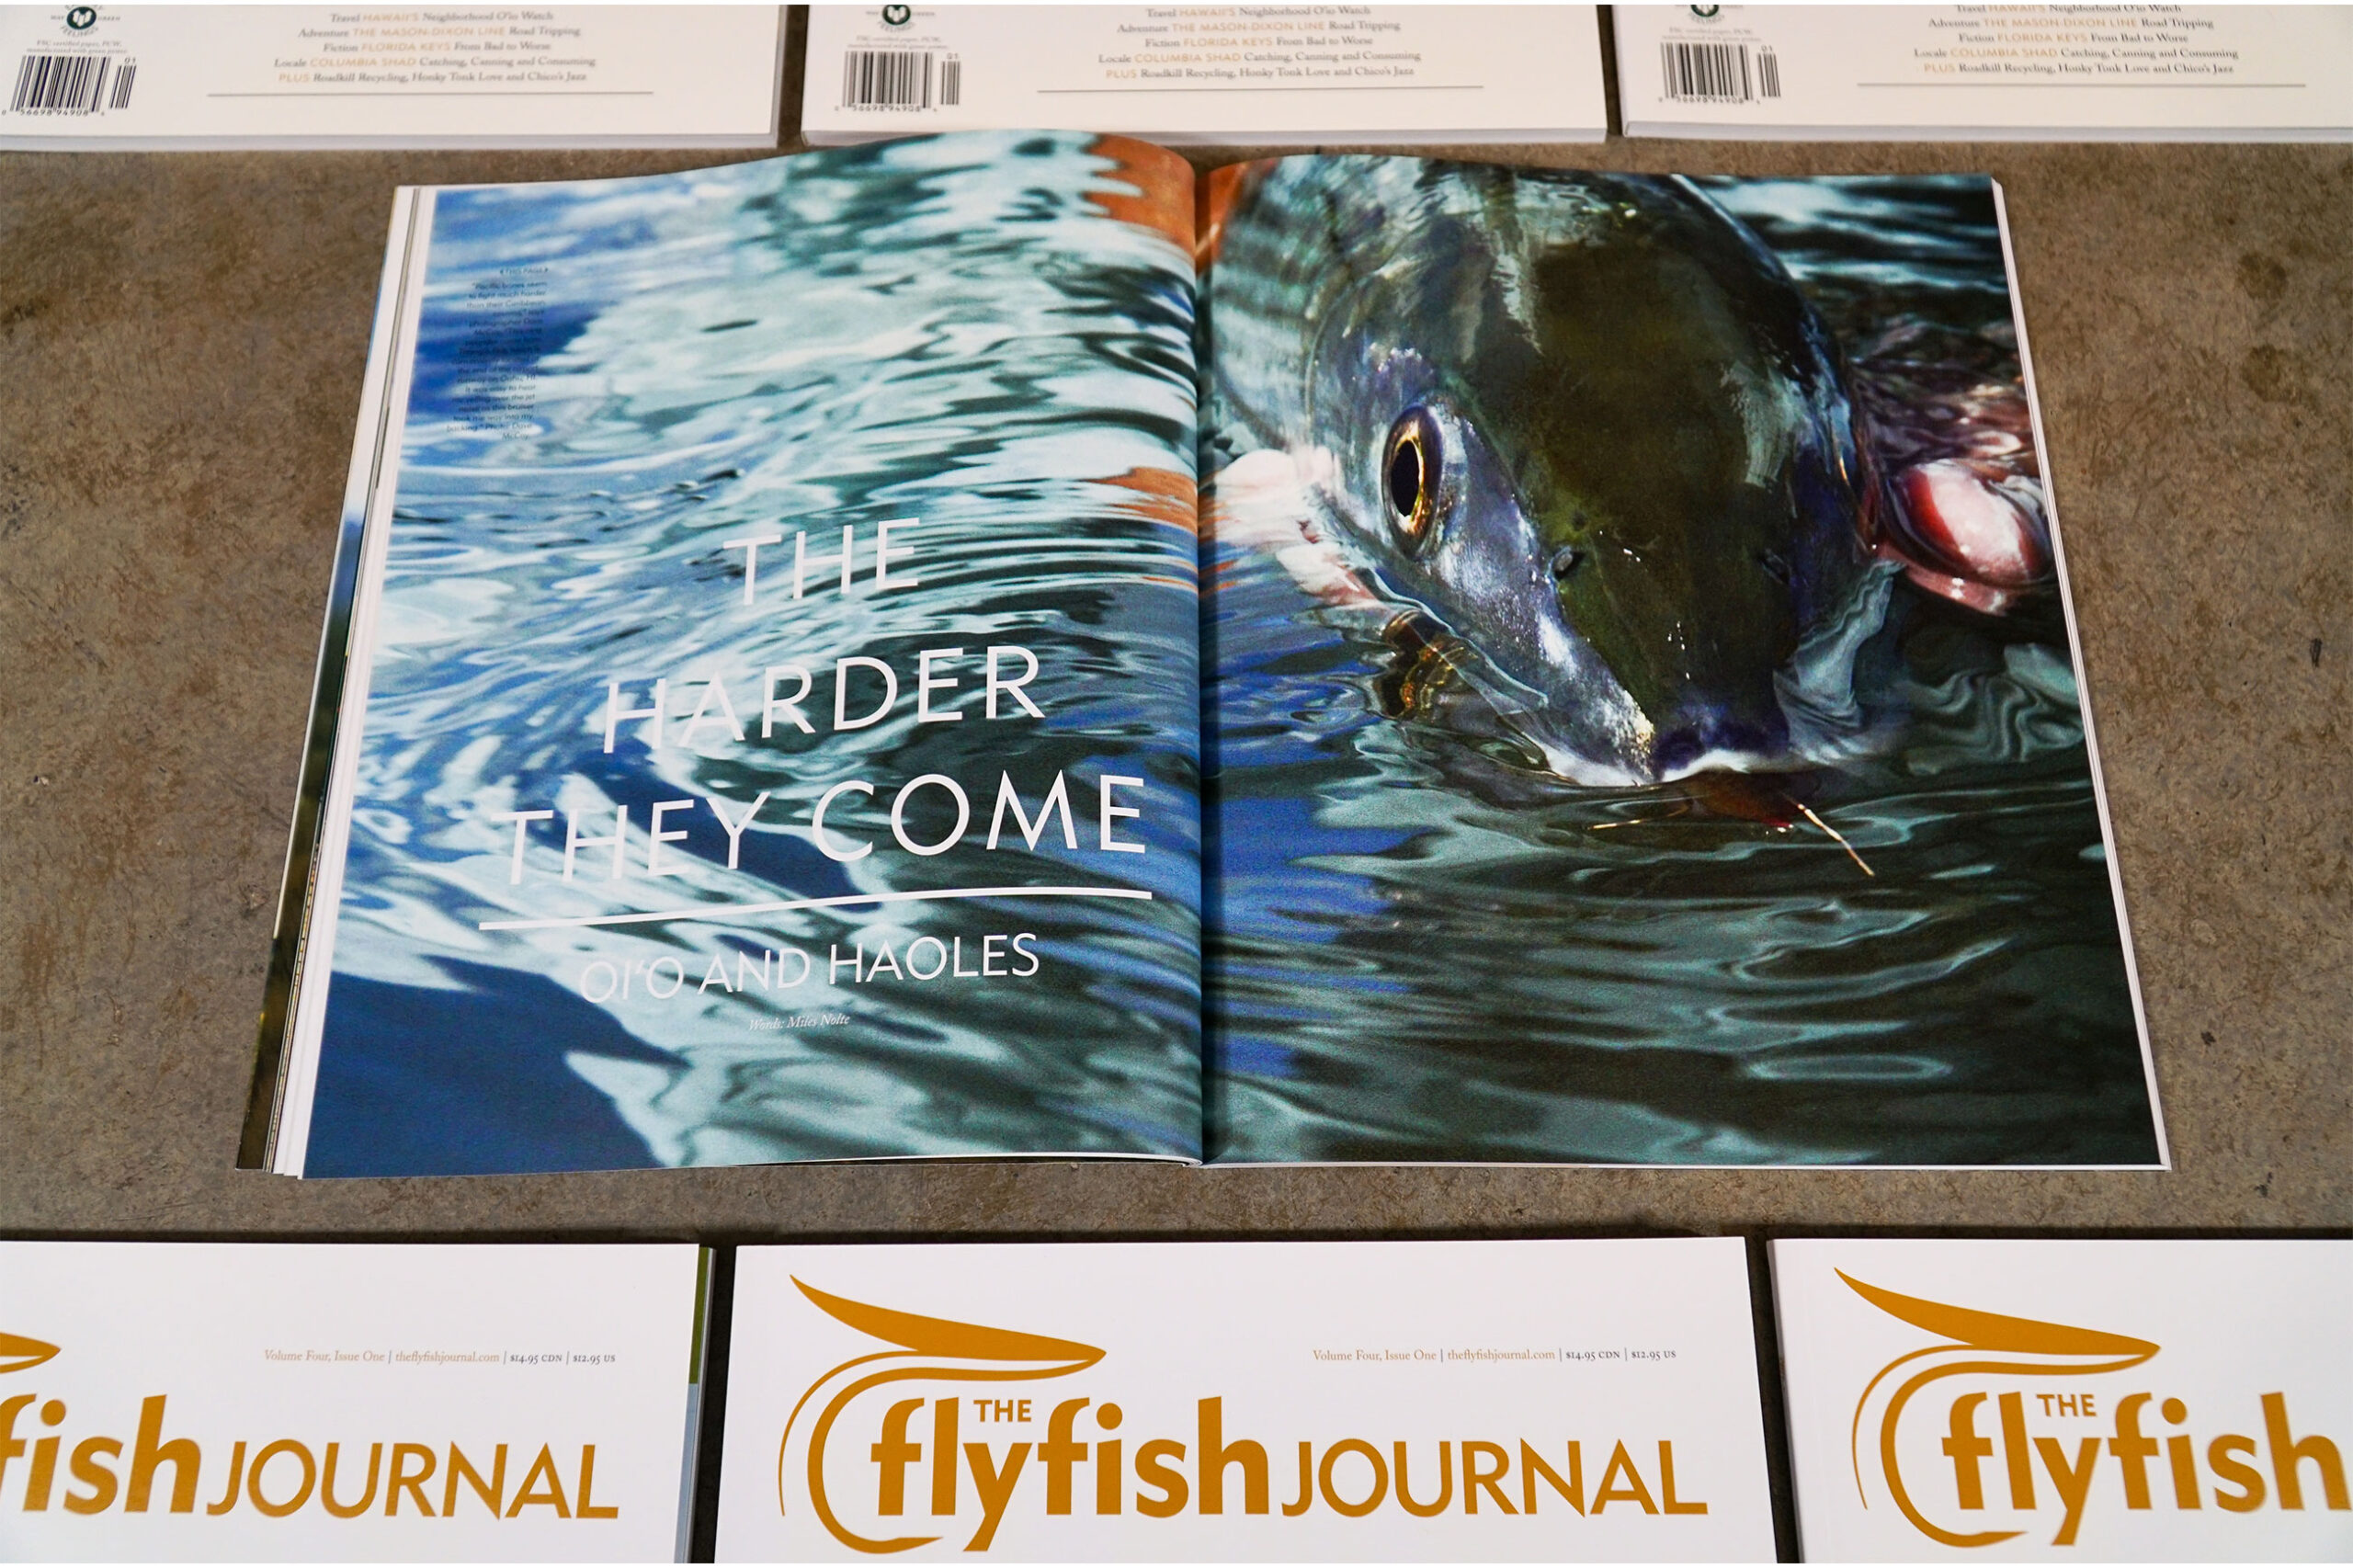 The Flyfish Journal Volume 4 Issue 1 Feature The Harder They Come